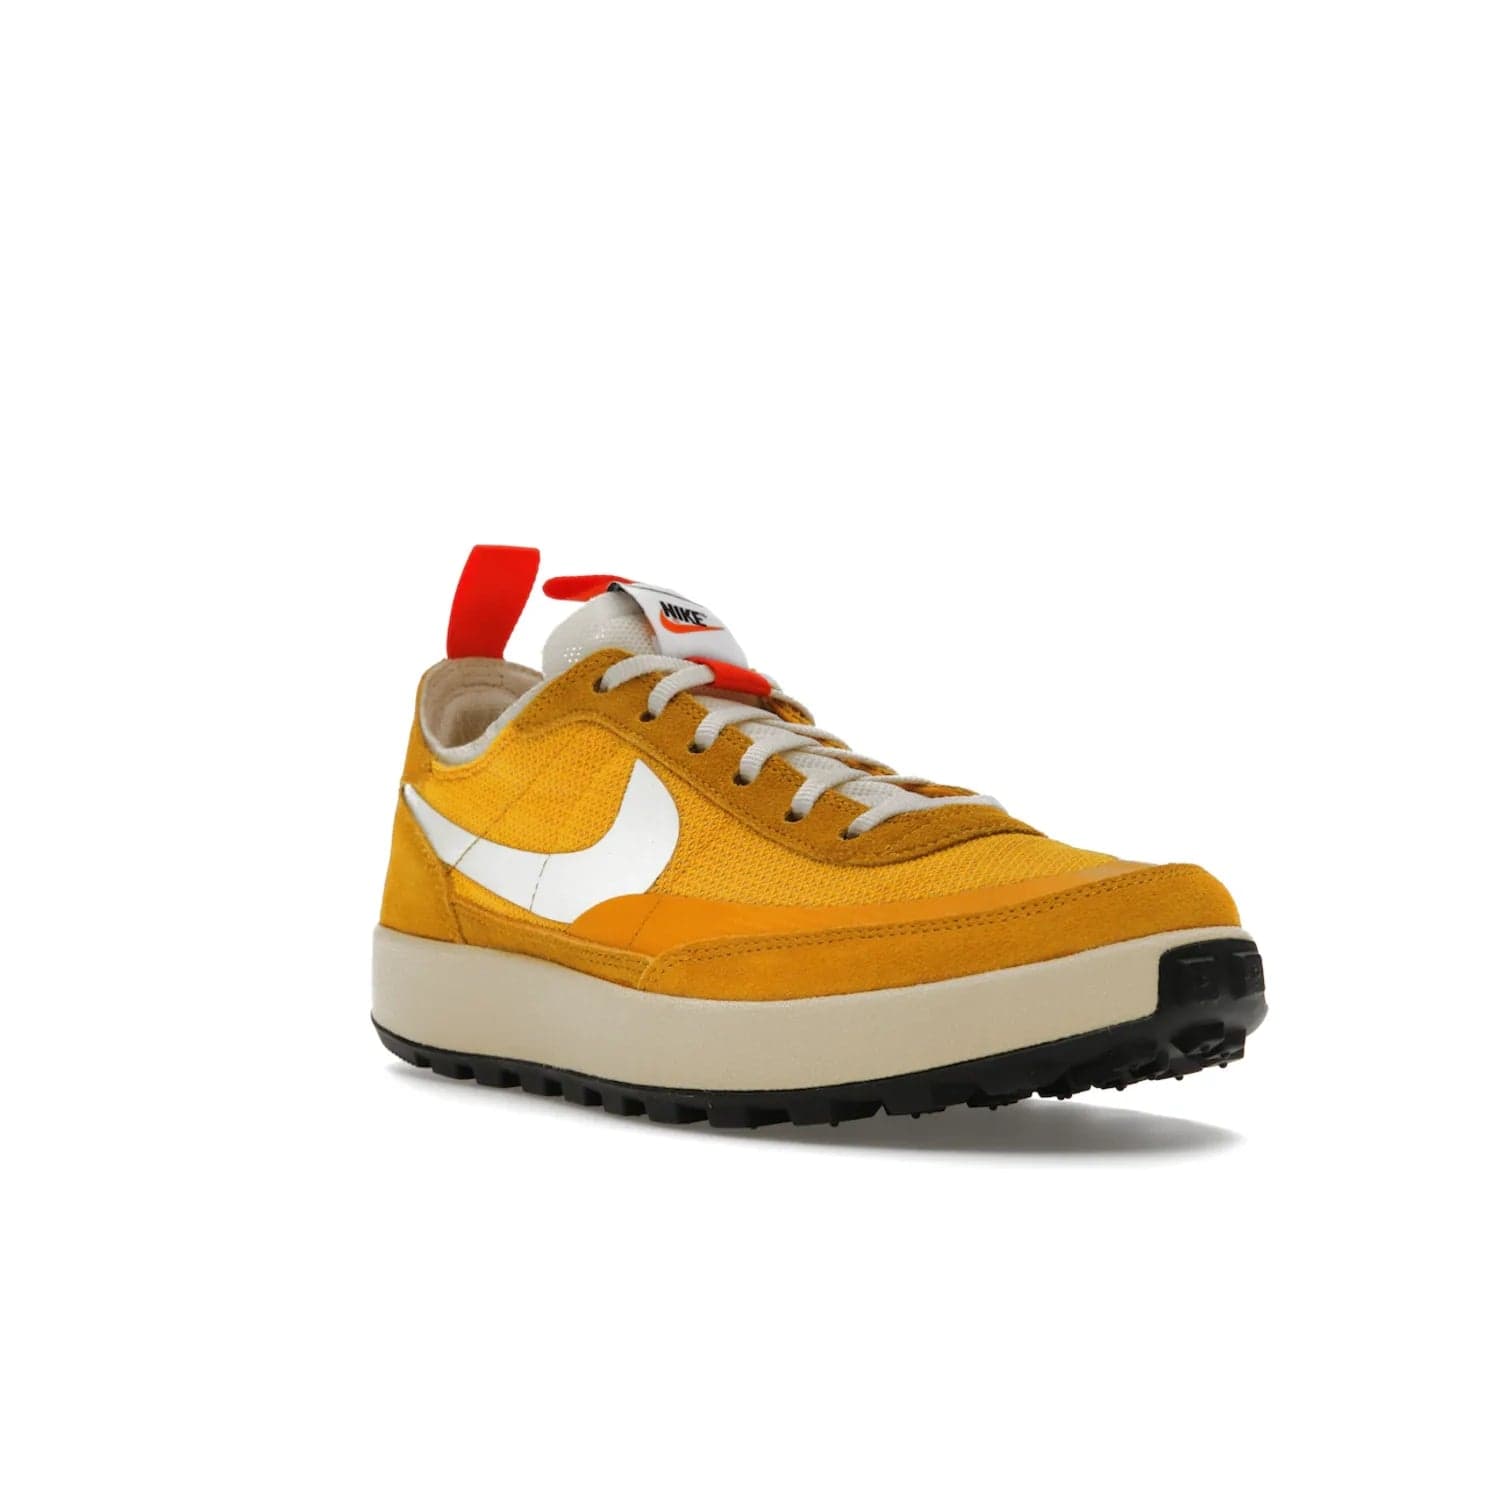 NikeCraft General Purpose Shoe Tom Sachs Archive Dark Sulfur - Image 6 - Only at www.BallersClubKickz.com - Collab between Nike & Tom Sachs. The NikeCraft General Purpose Shoe features dark sulfur mesh upper, suede overlays, contrasting white Swoosh and orange tabs. EVA cushioning & black waffle-traction rubber outsole ensures performance. Stylish & perfect for any occasion, the shoe released September 2, 2022.